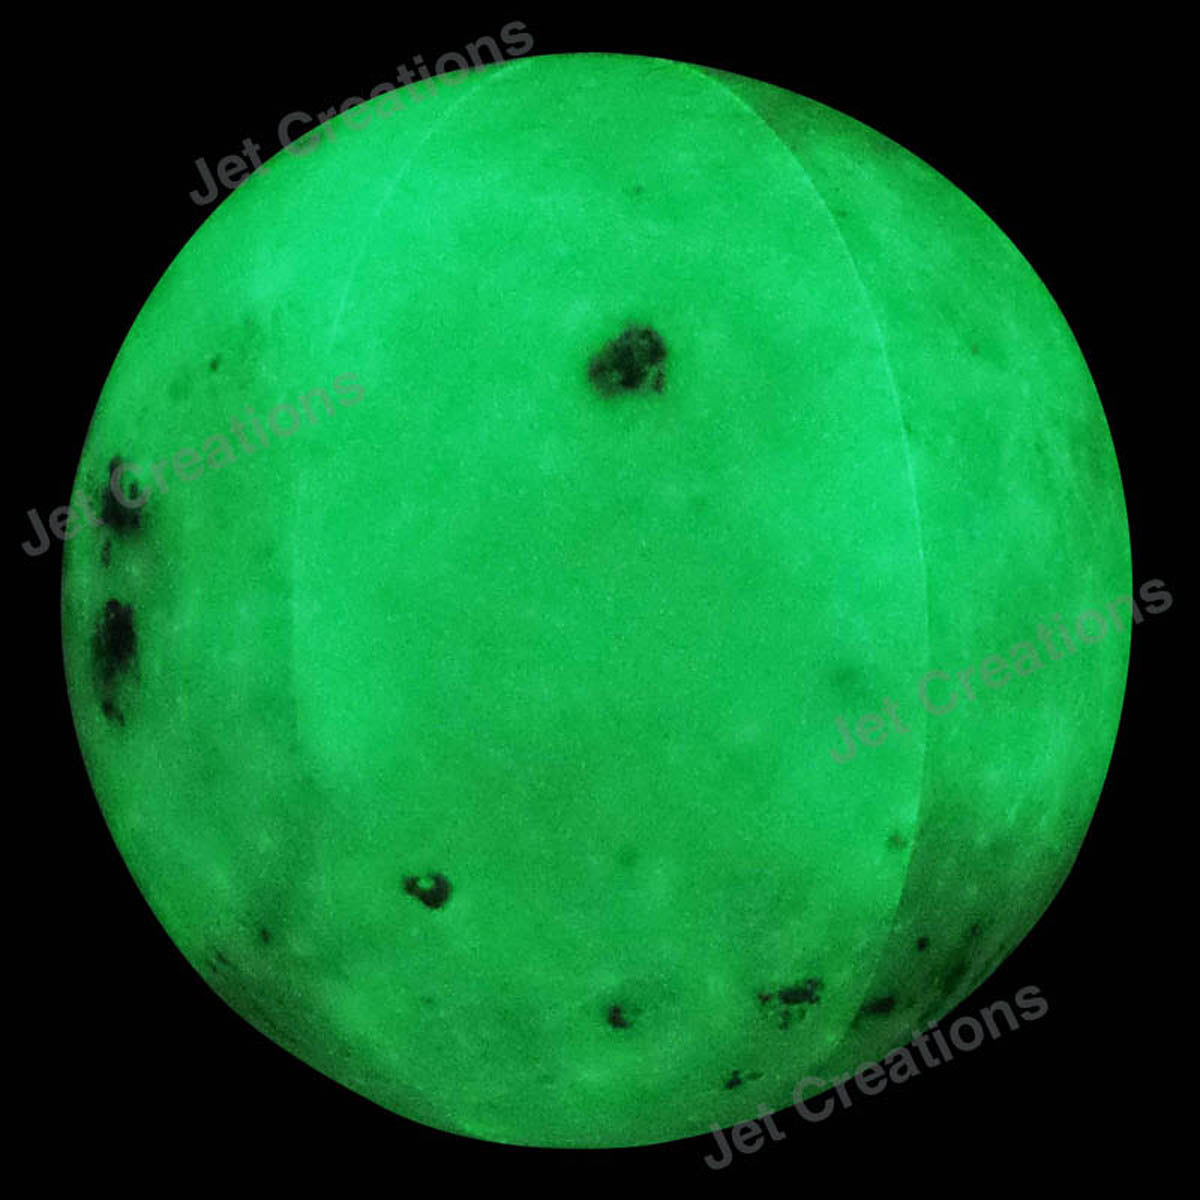 Inflatable Glow in the Dark Moon - 12 inch Dia.